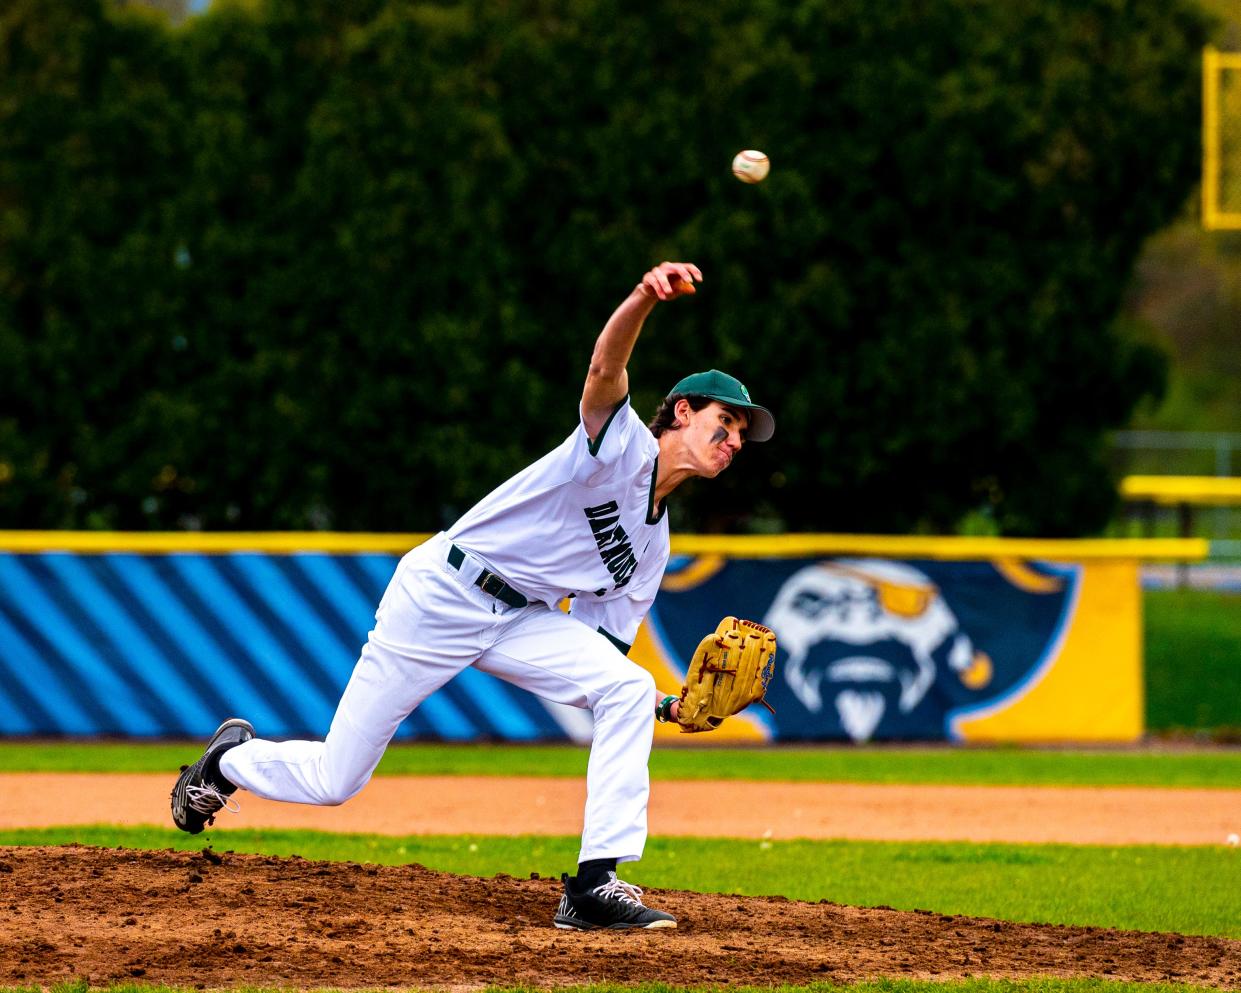 Dartmouth's Ian Rego fires to the plate during a game last season. He's now Dartmouth's ace.